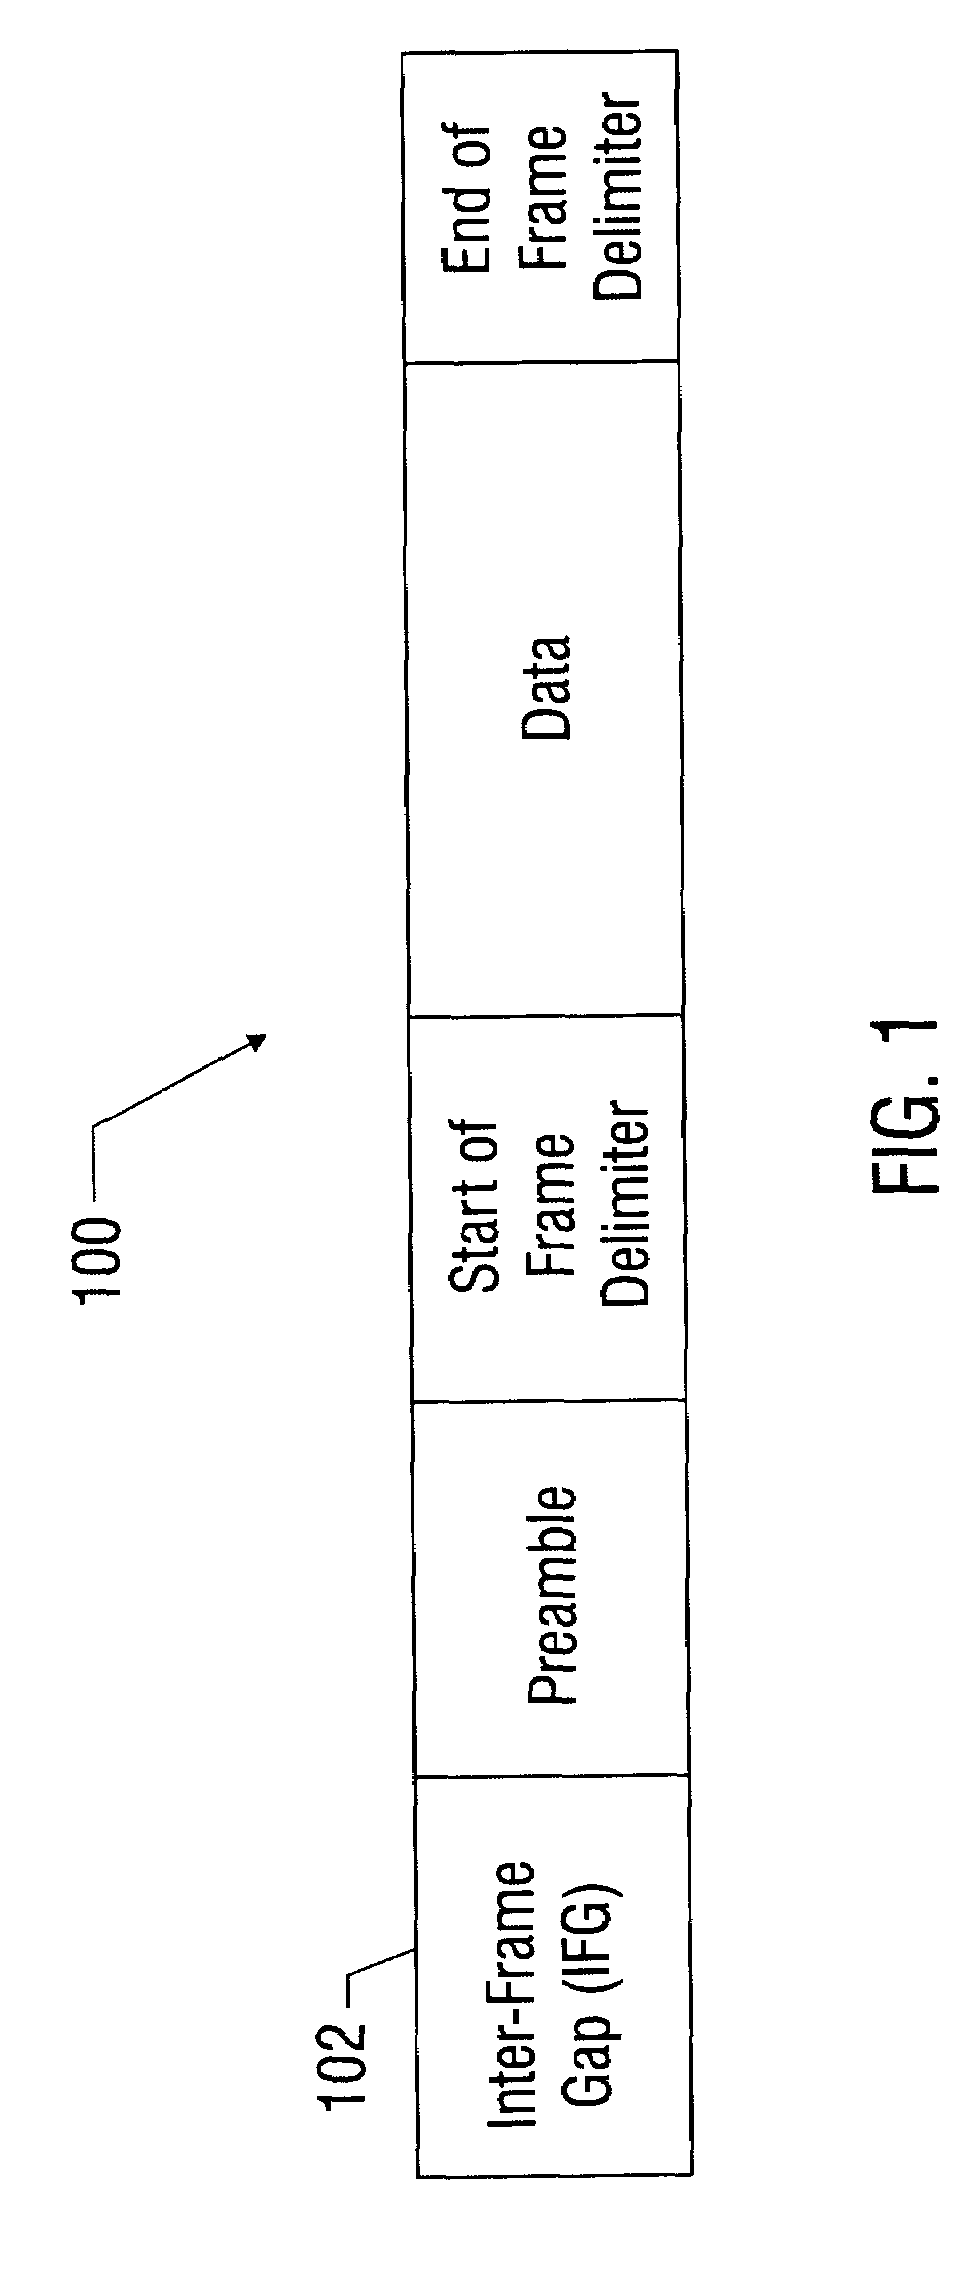 System for and method of communicating control information between entities interconnected by backplane connections